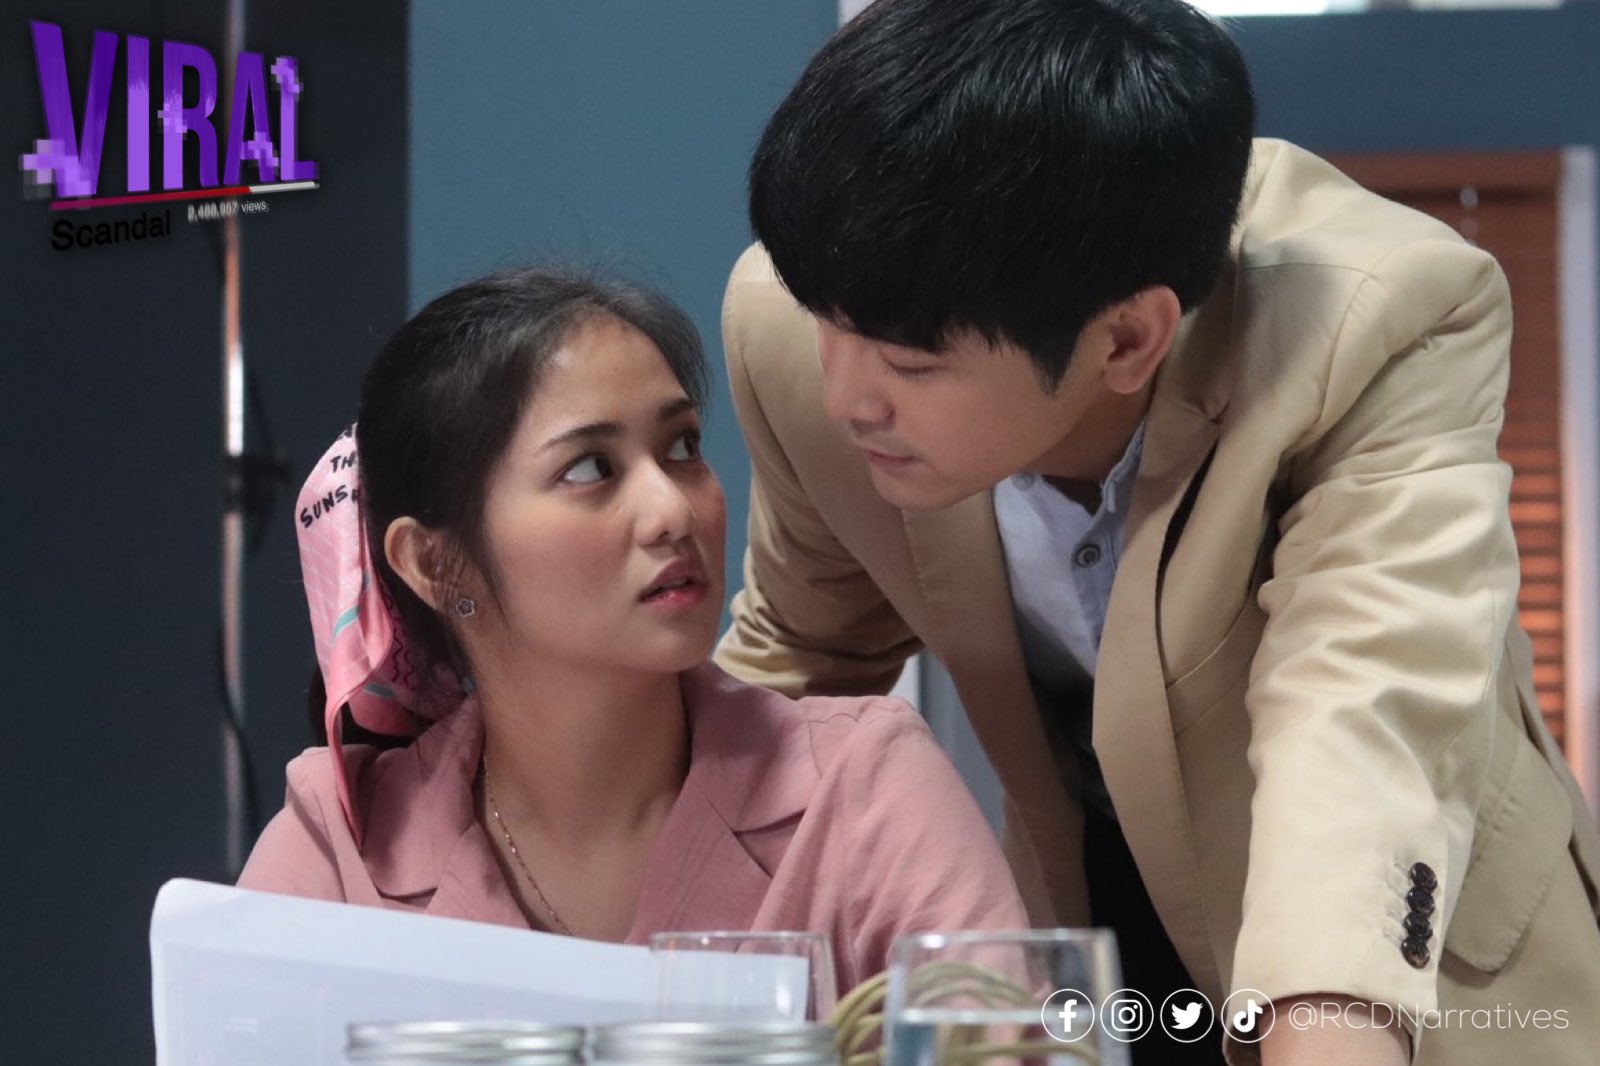 "Viral Scandal" showcases acting prowess of Charlie and Joshua